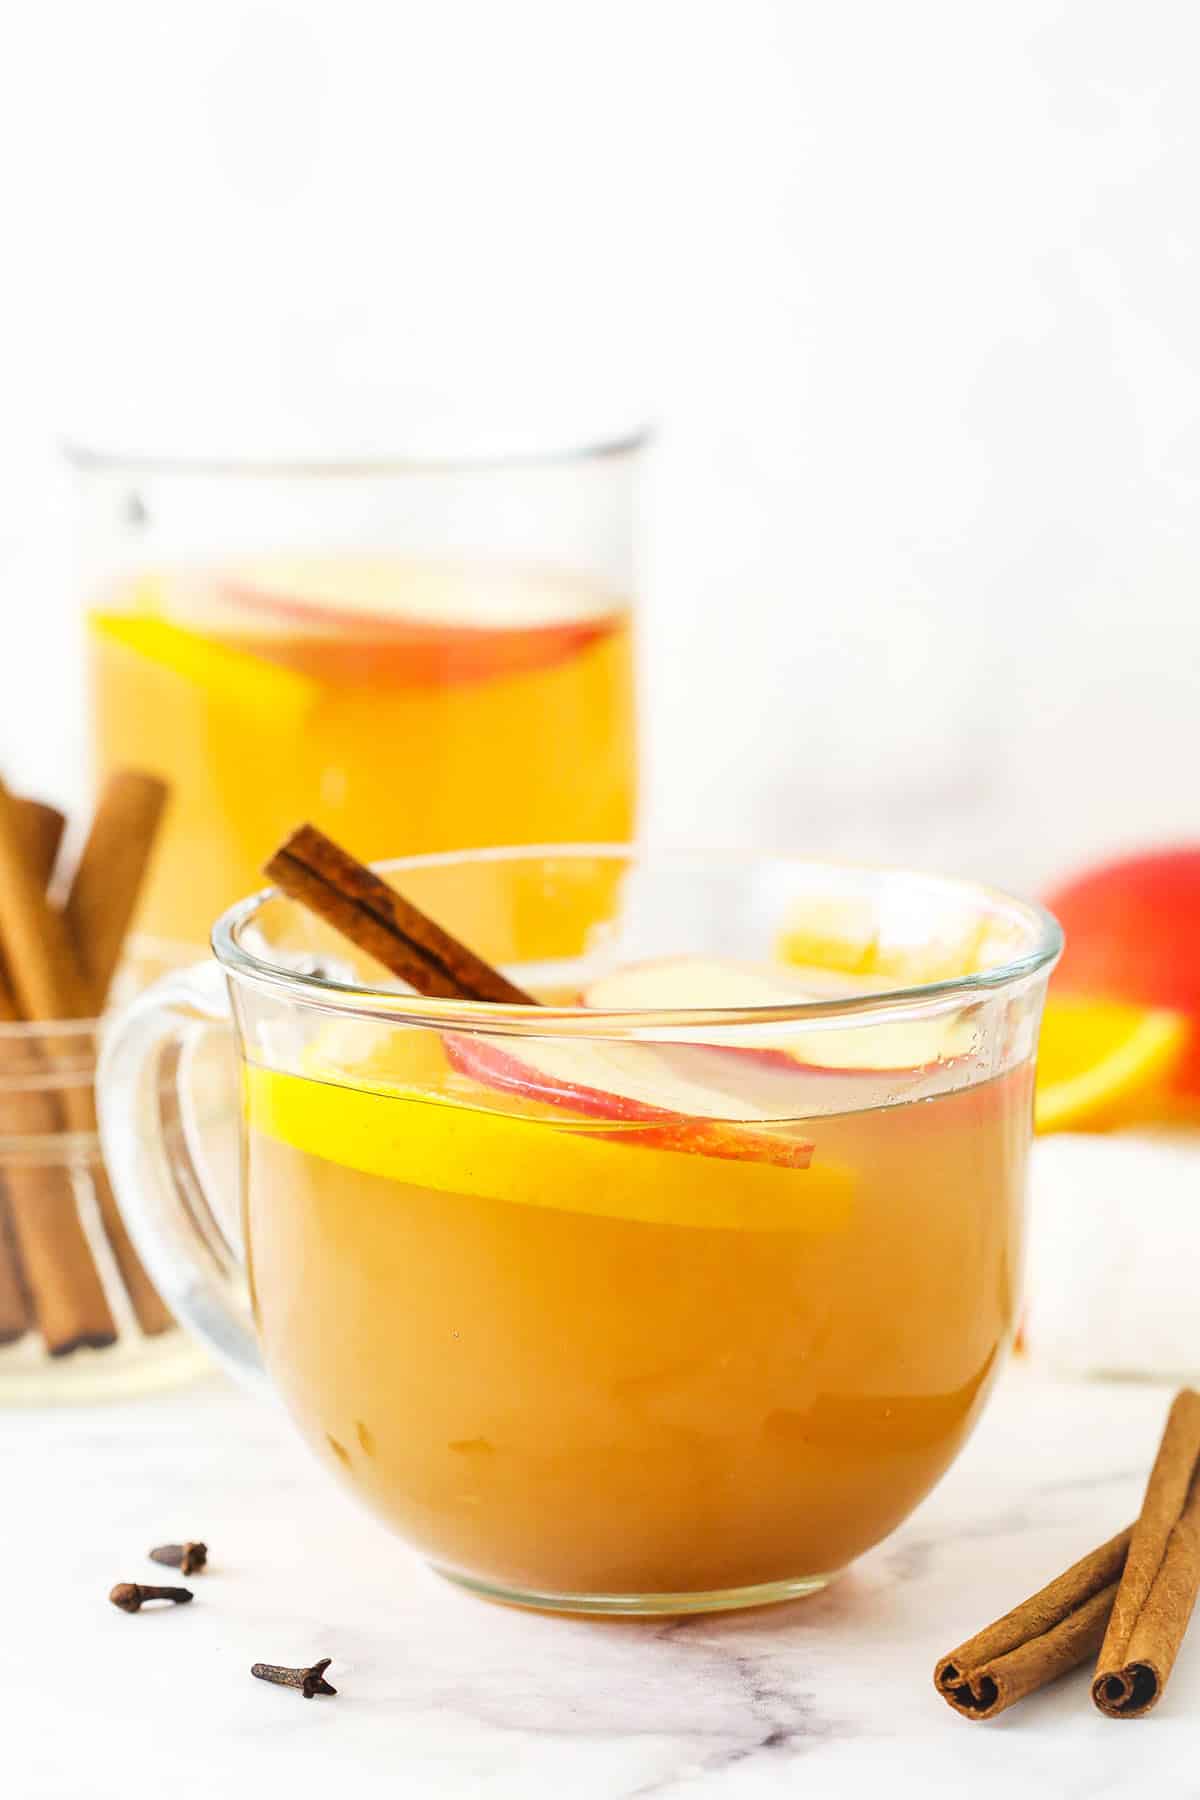 Homemade apple cider in a mug with a cinnamon stick, an orange slice and two apple slices on top as a garnish